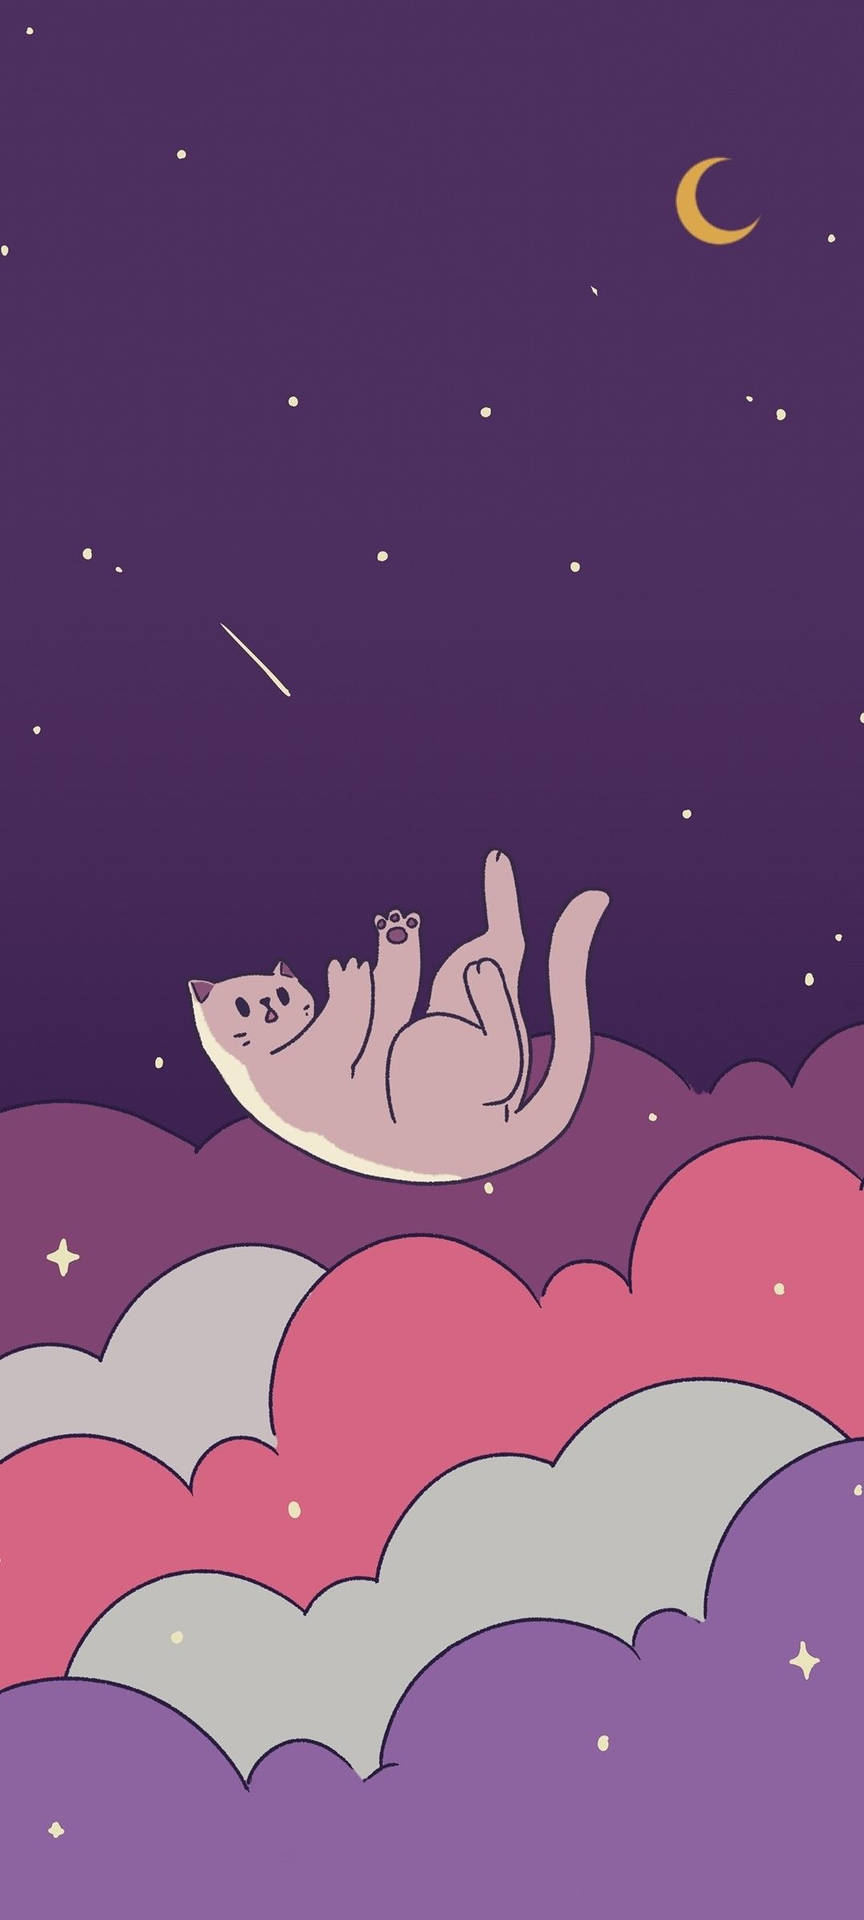 A Cat Is Flying In The Clouds Wallpaper